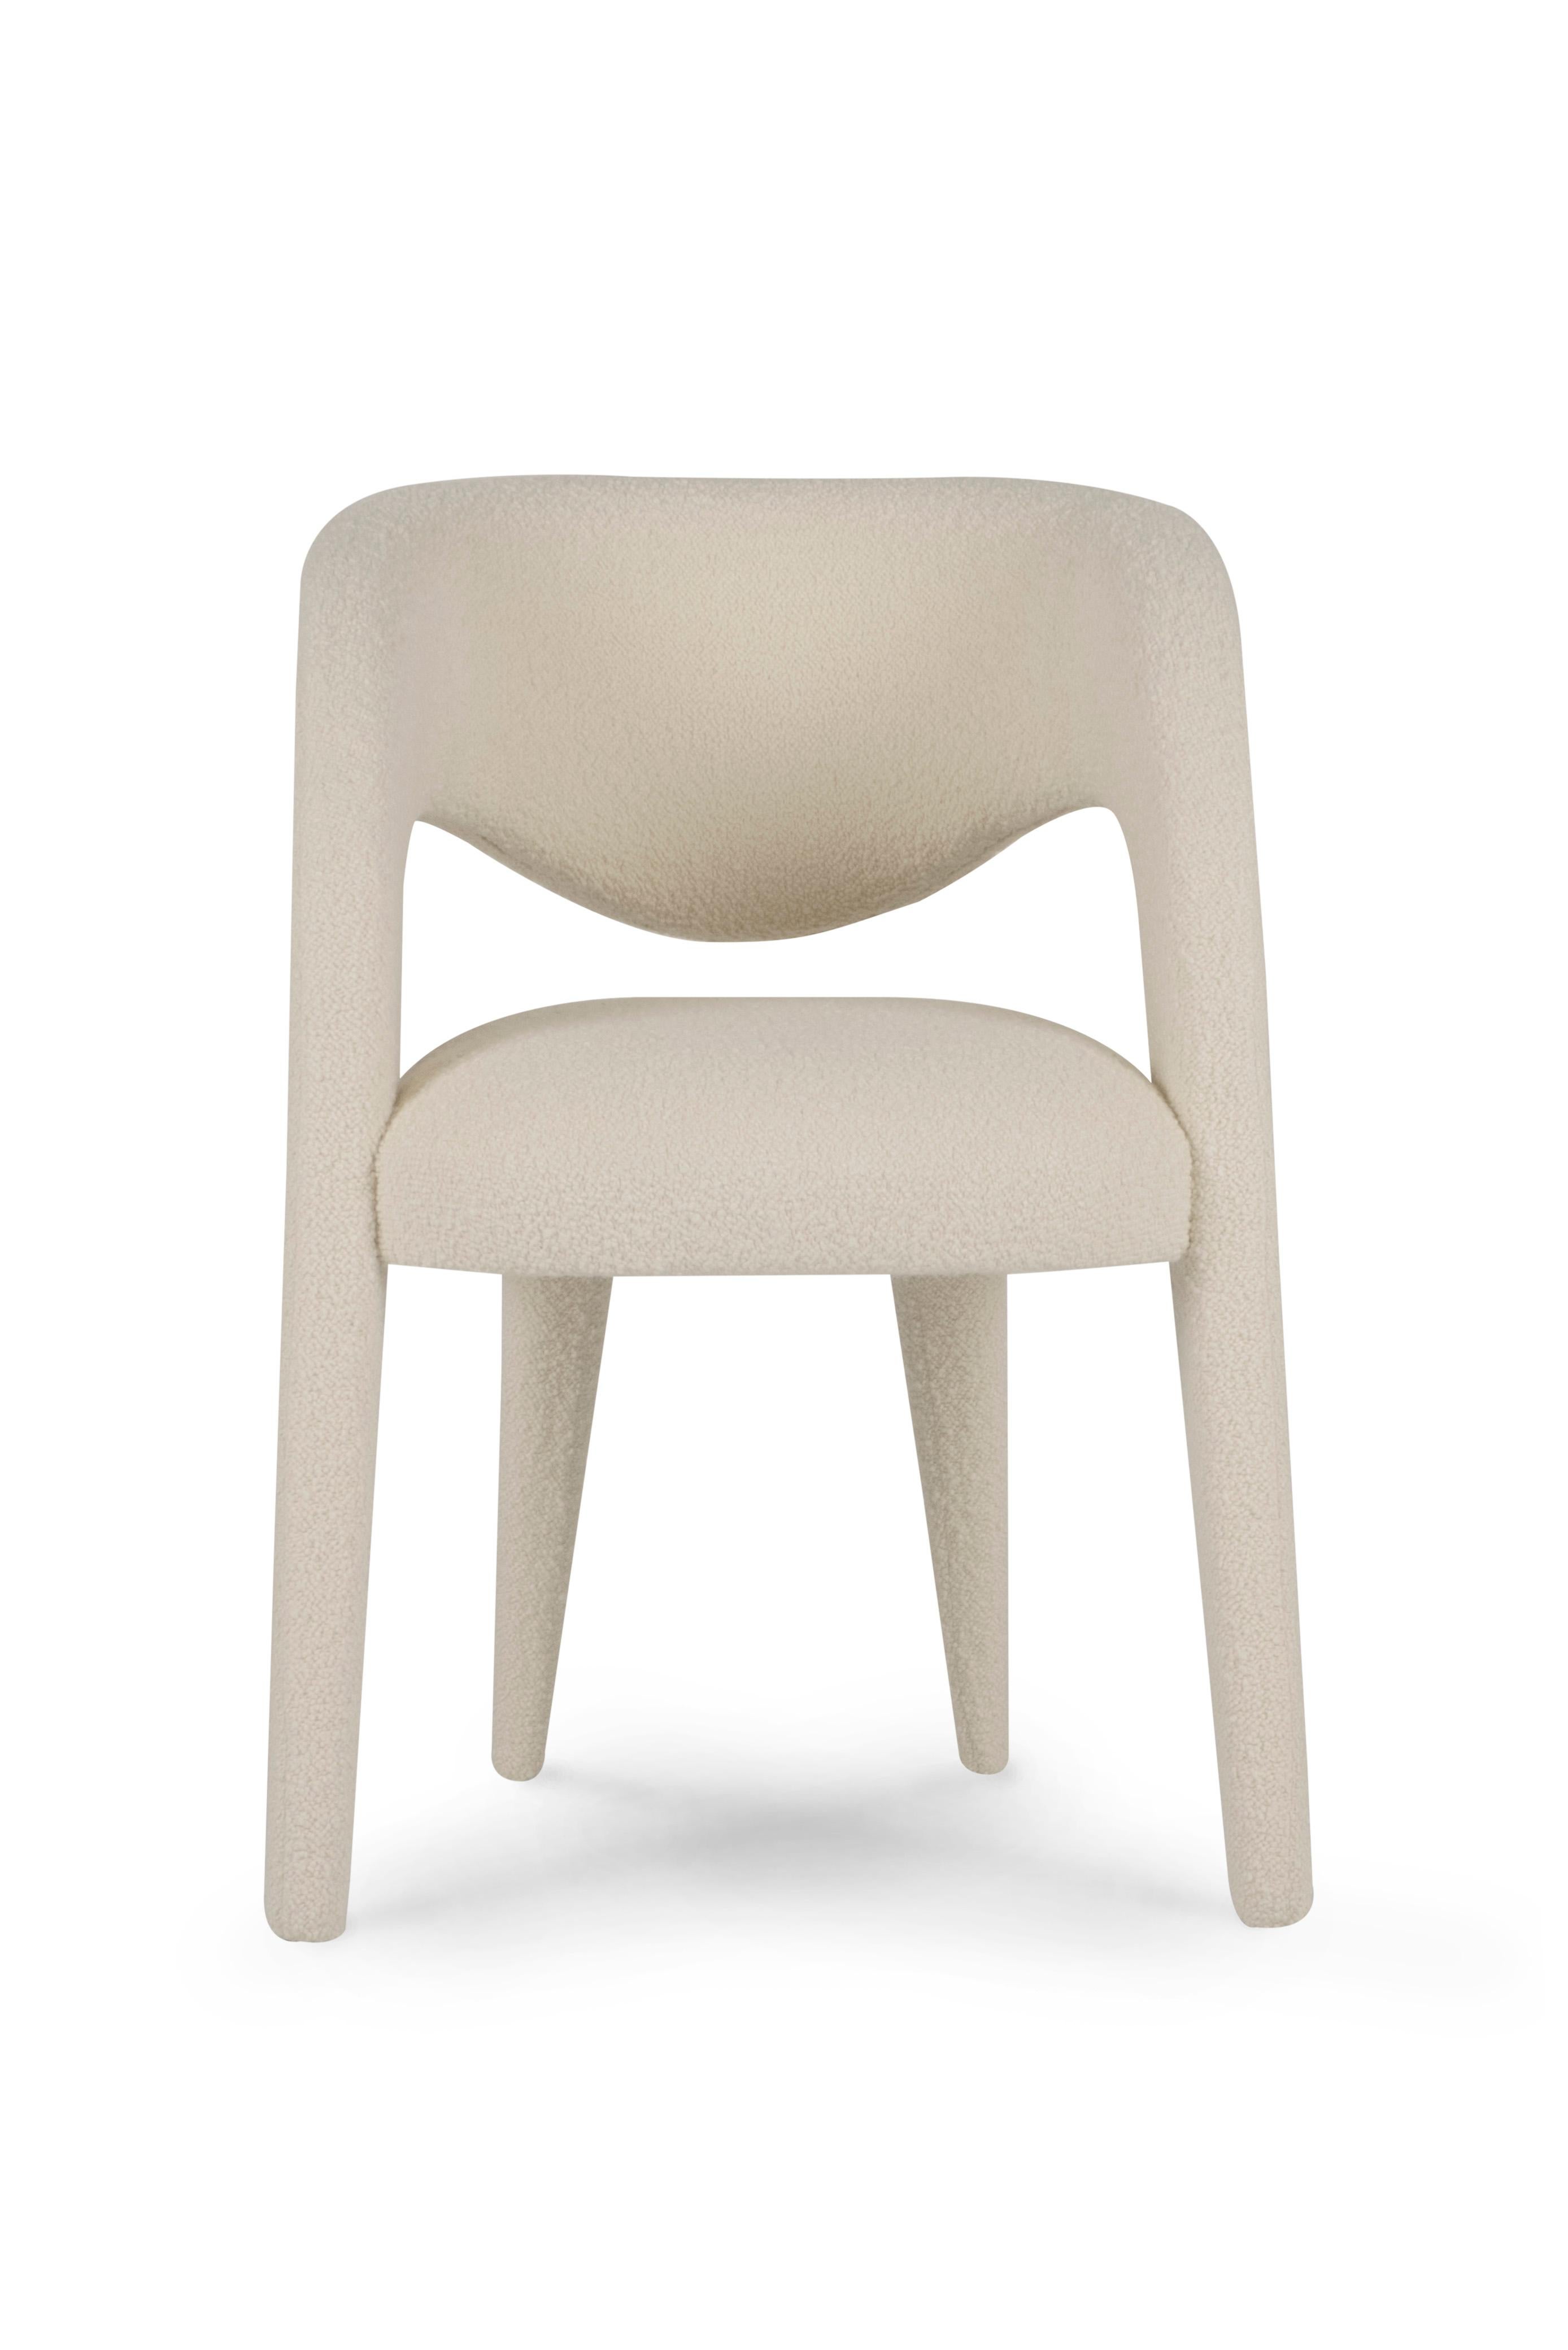 Contemporary Modern Laurence Dining Chairs, Dedar Bouclé, Handmade in Portugal by Greenapple For Sale